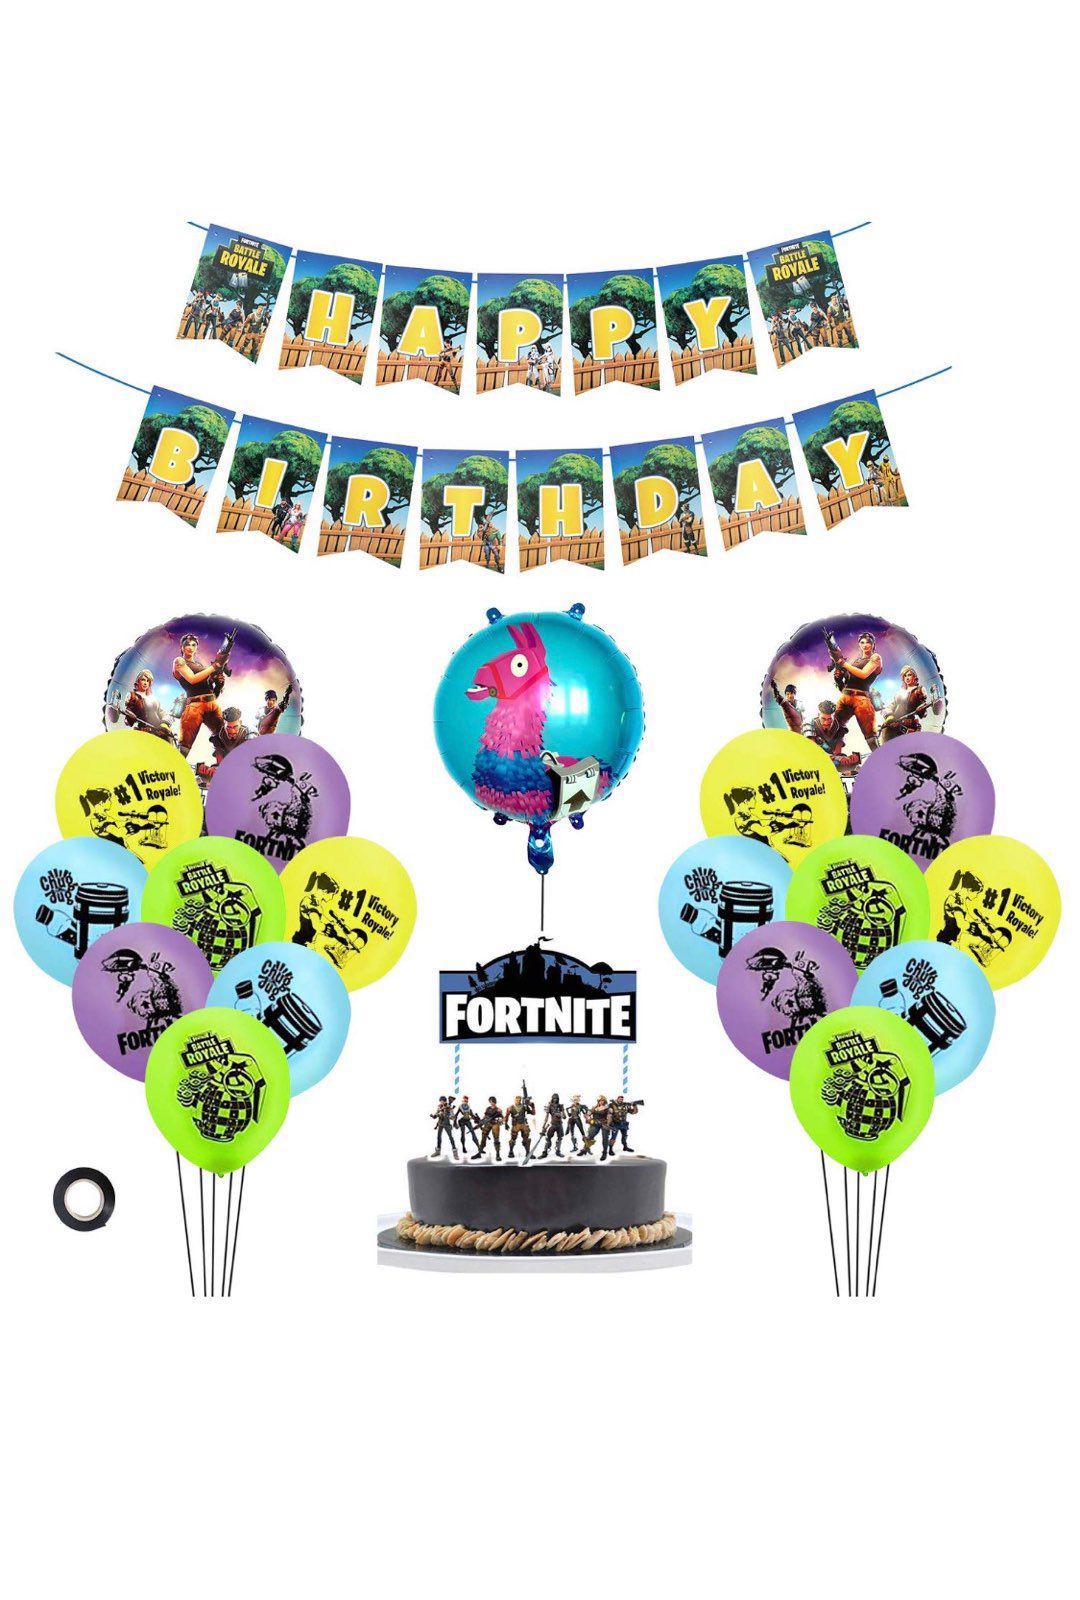 Fortnite Party Supplies Set Brand New